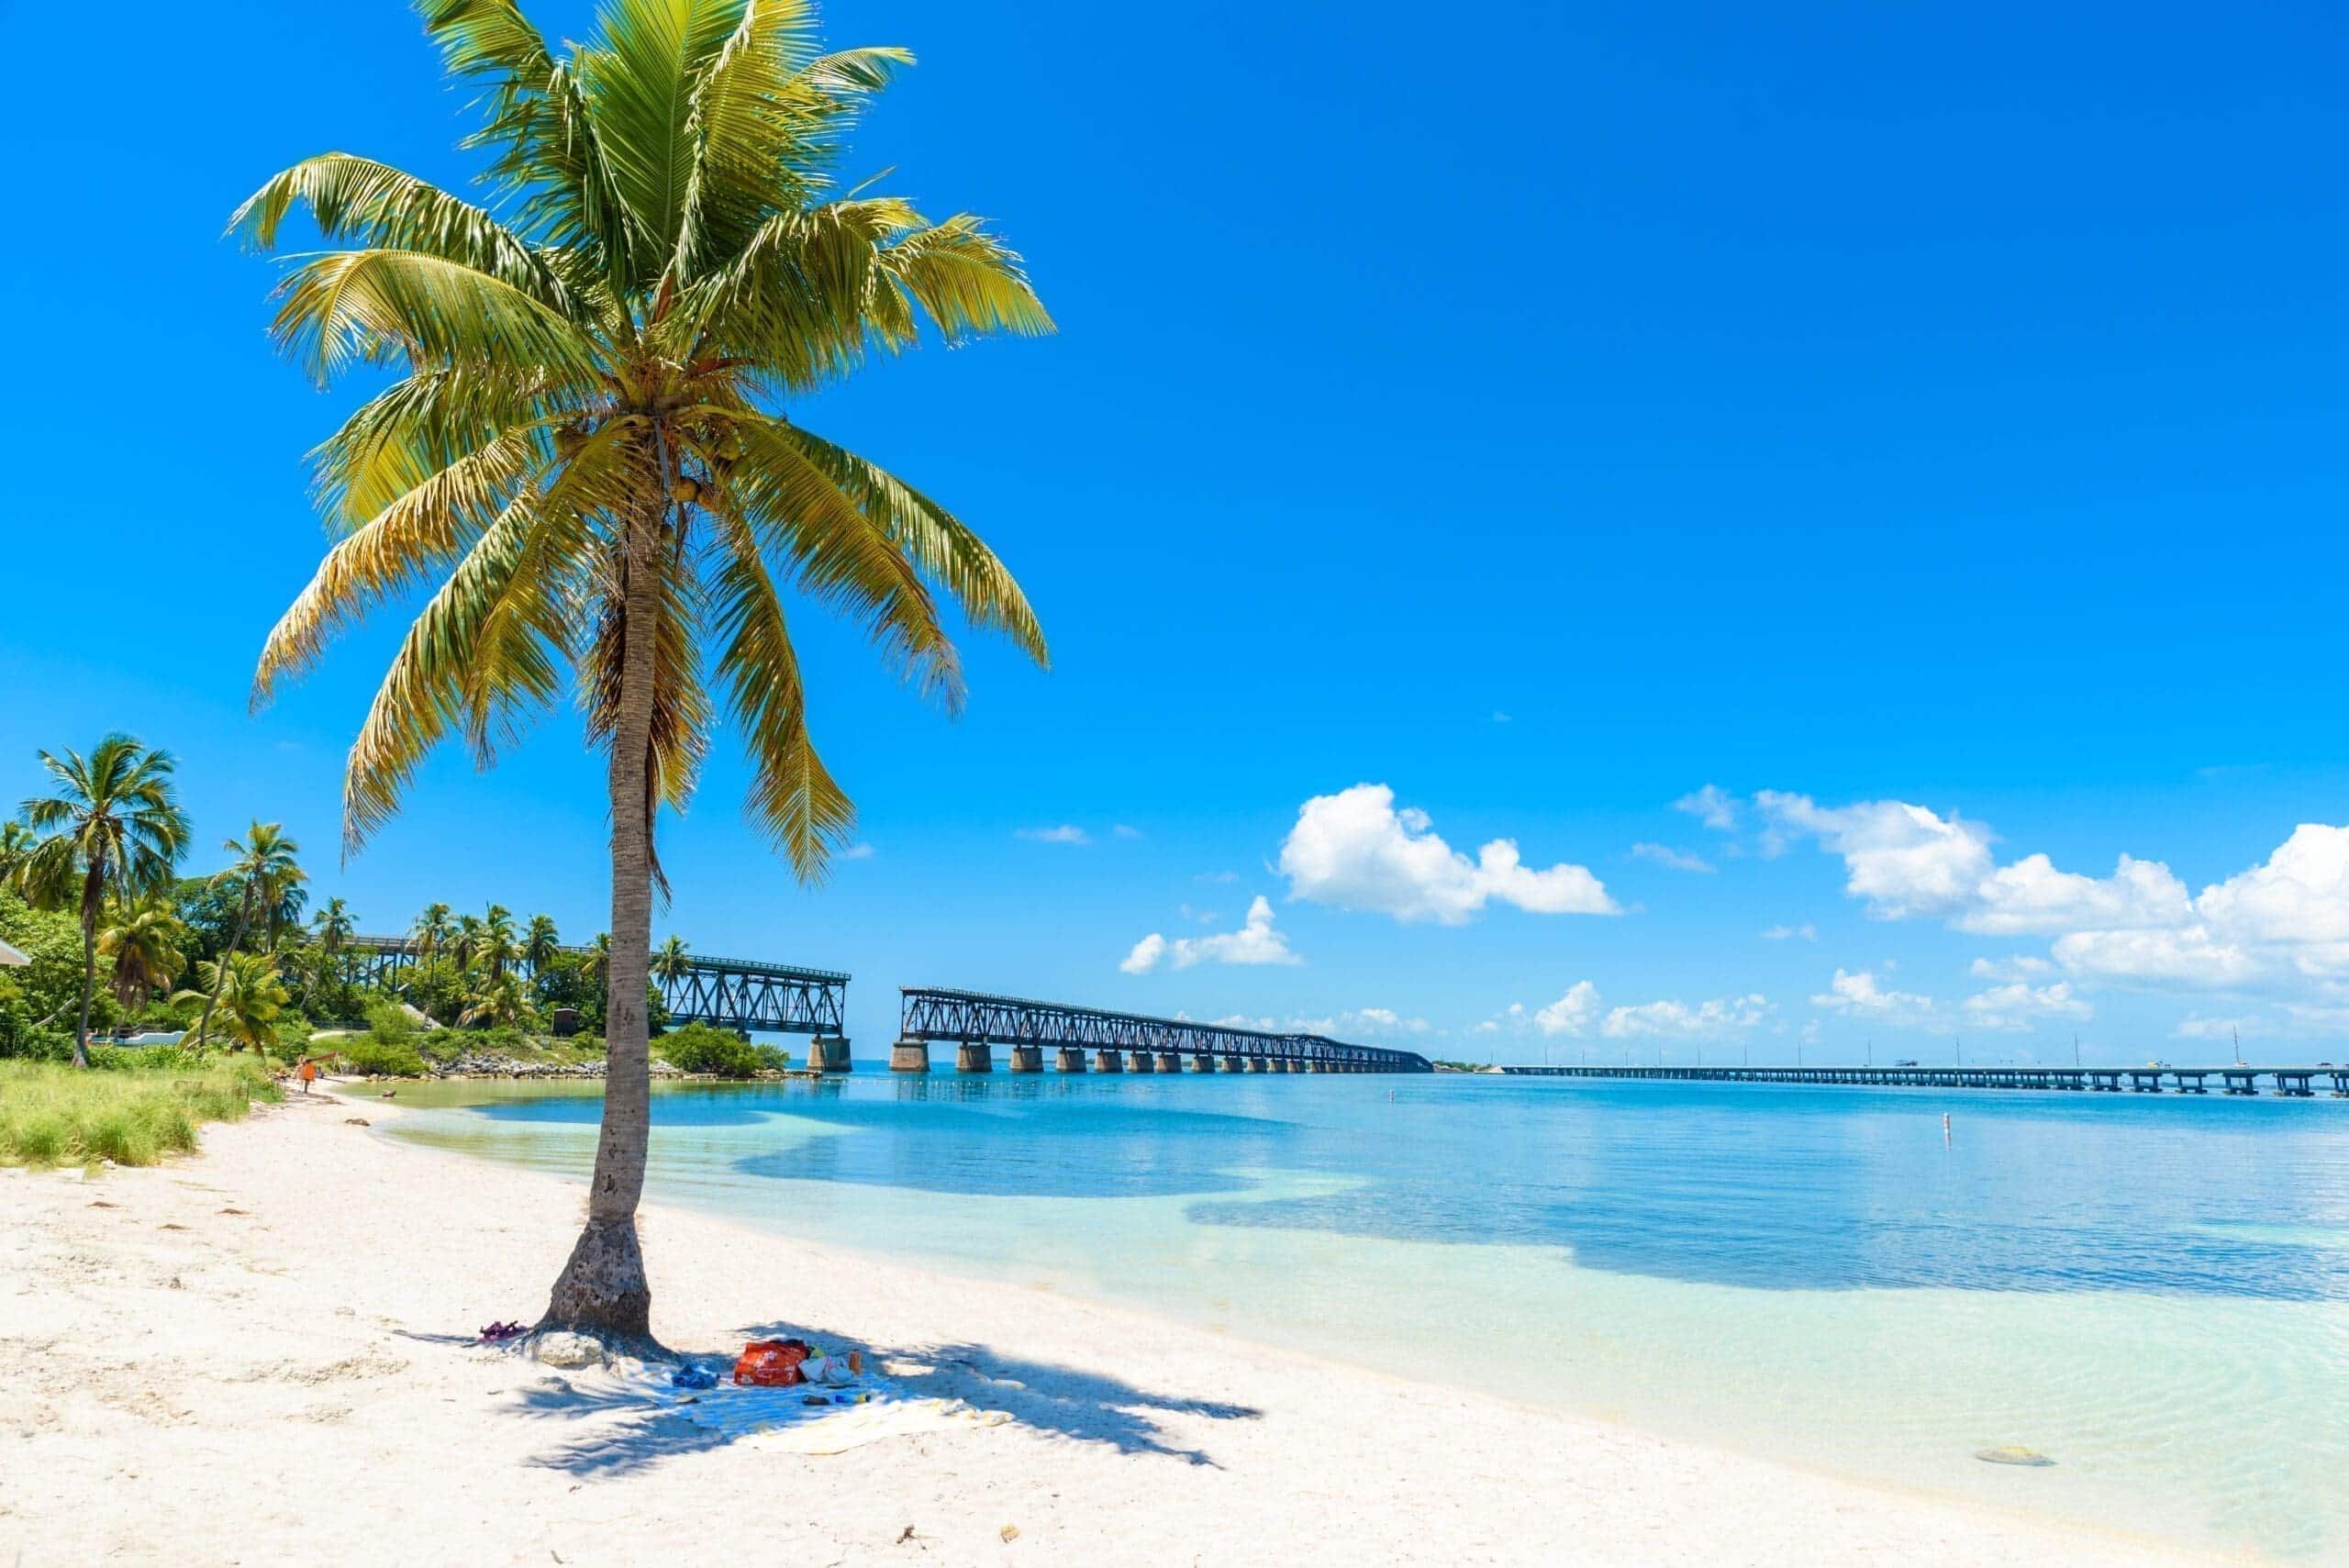 What should you not miss in the Florida Keys?